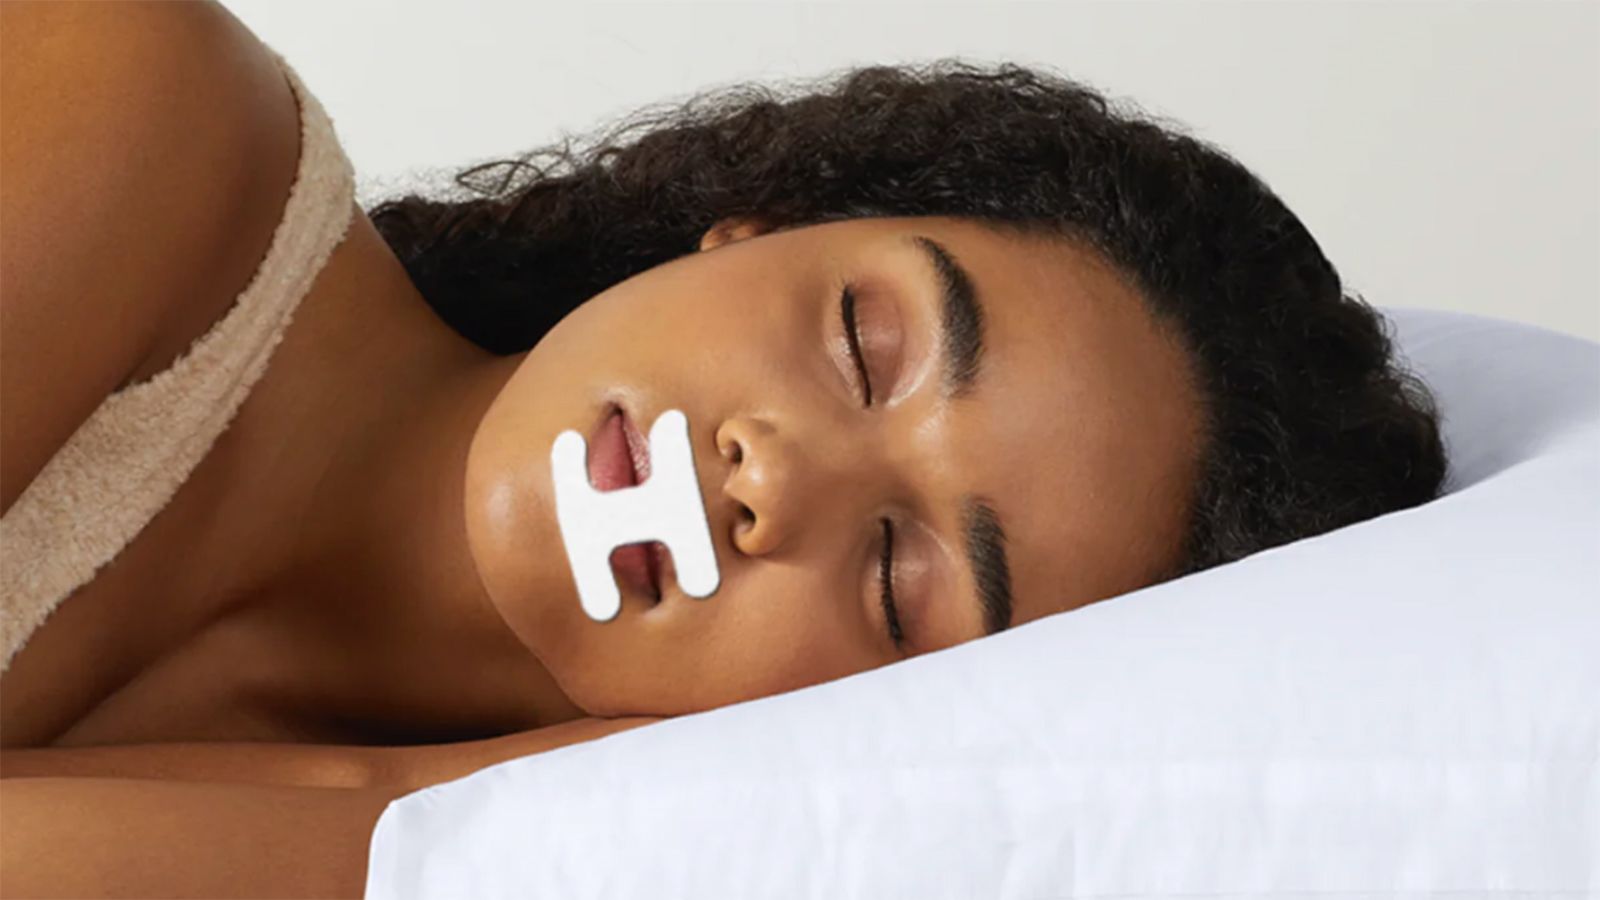 Mouth taping for sleep: Does it work?